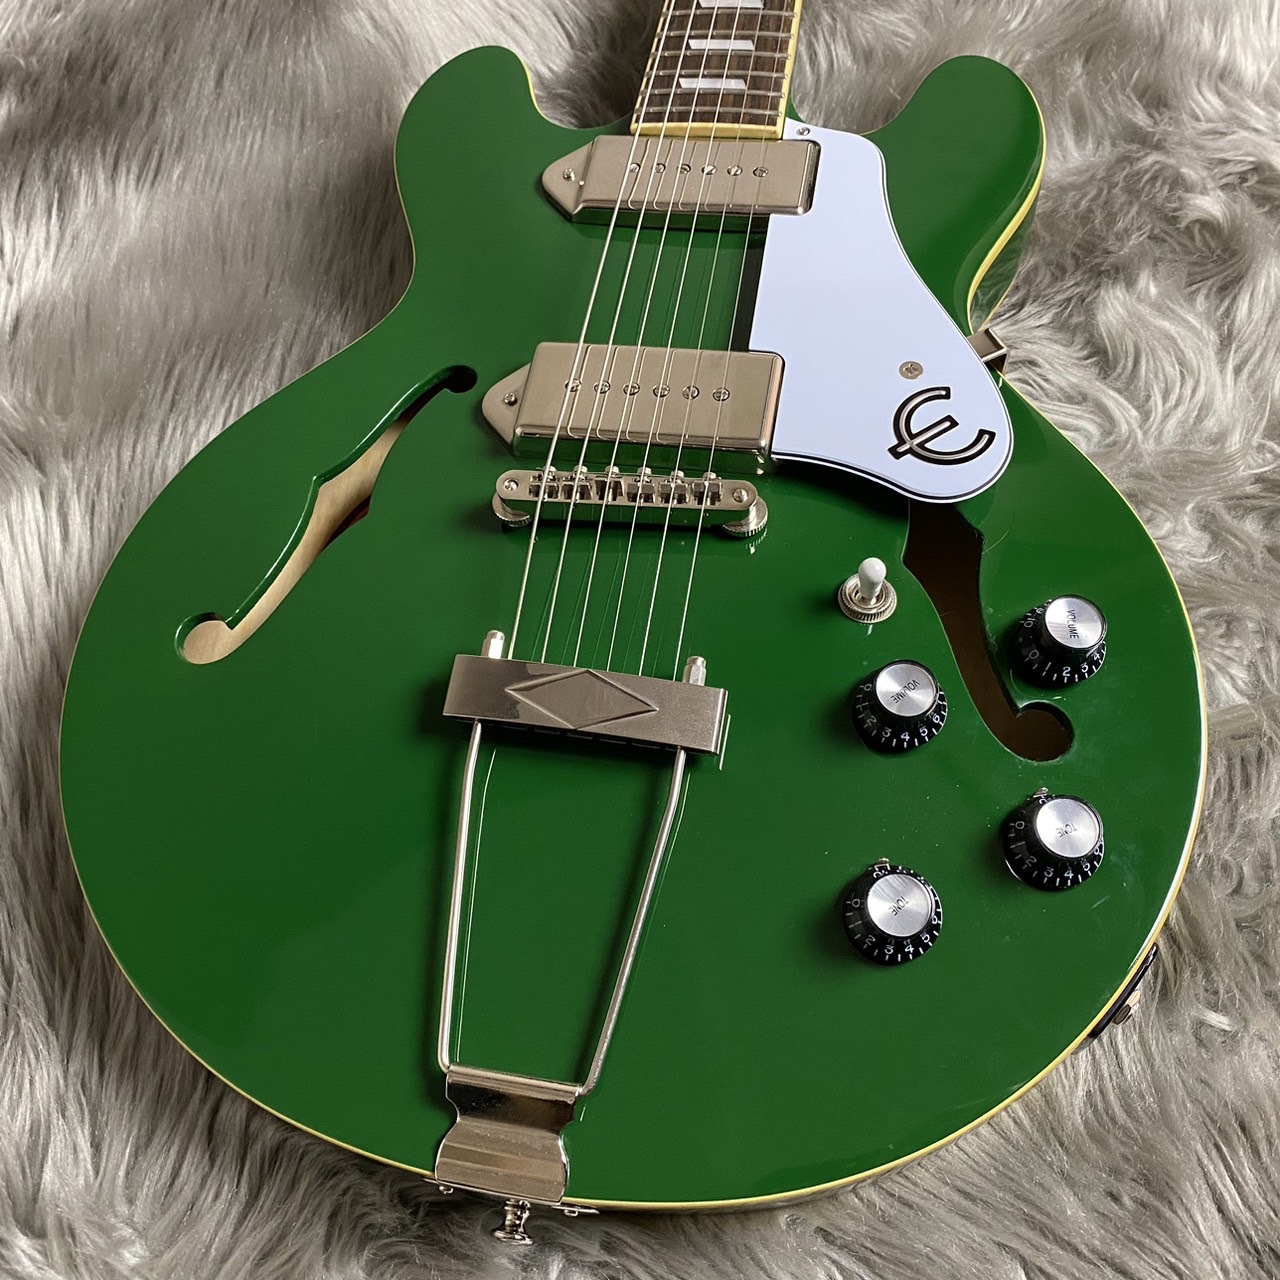 CONTENTSEpiphone Limited Edition Casino Coupe Inverness Green【現物画像】ギターアドバイザーが楽器選びをサポート最新情報を手に入れよう分割無金利キャンペーン音楽教室も開講中お問い合わせEpiphone Limited E […]